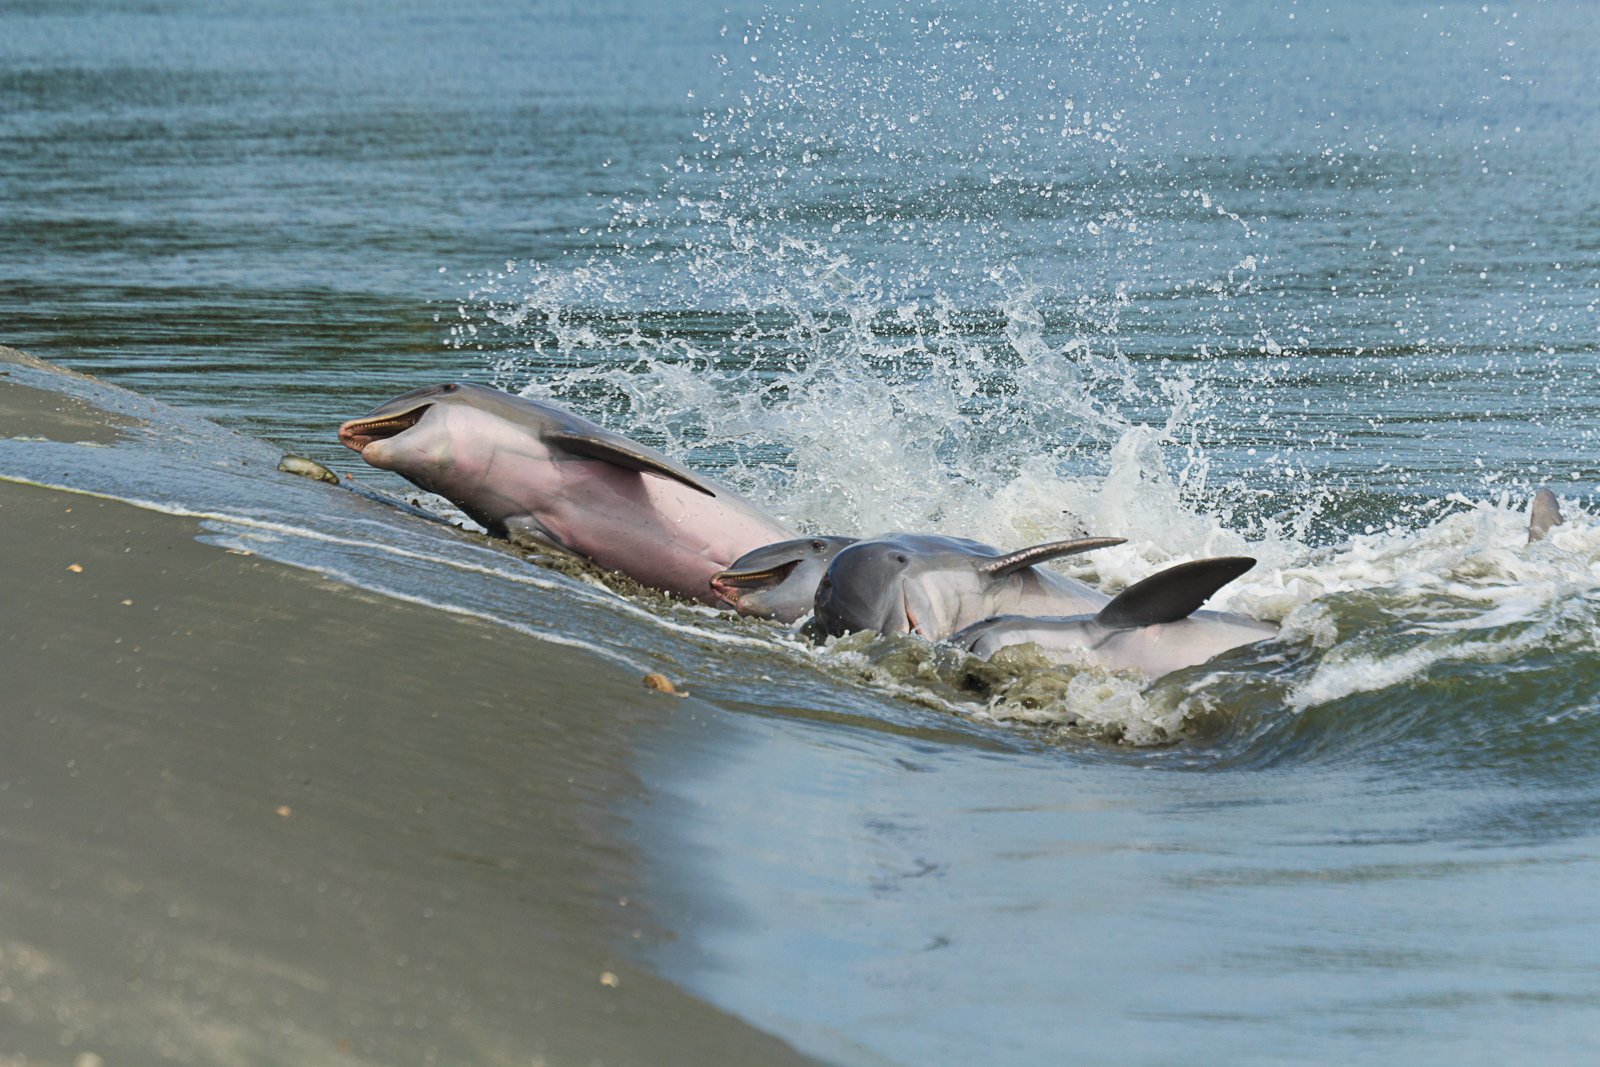 HONORABLE MENTION Amateur category: Dolphin Strand Feeding by Patricia Schaefer; “Dolphin strand feeding is a unique behavior seen in the Charleston area. The dolphin work together using echolocation to toss fish up onto the shore and then throw themselves on the bank to feed. They safely return to the water to try again if they are still hungry. Taken on Seabrook Island on September 15, 2015.”